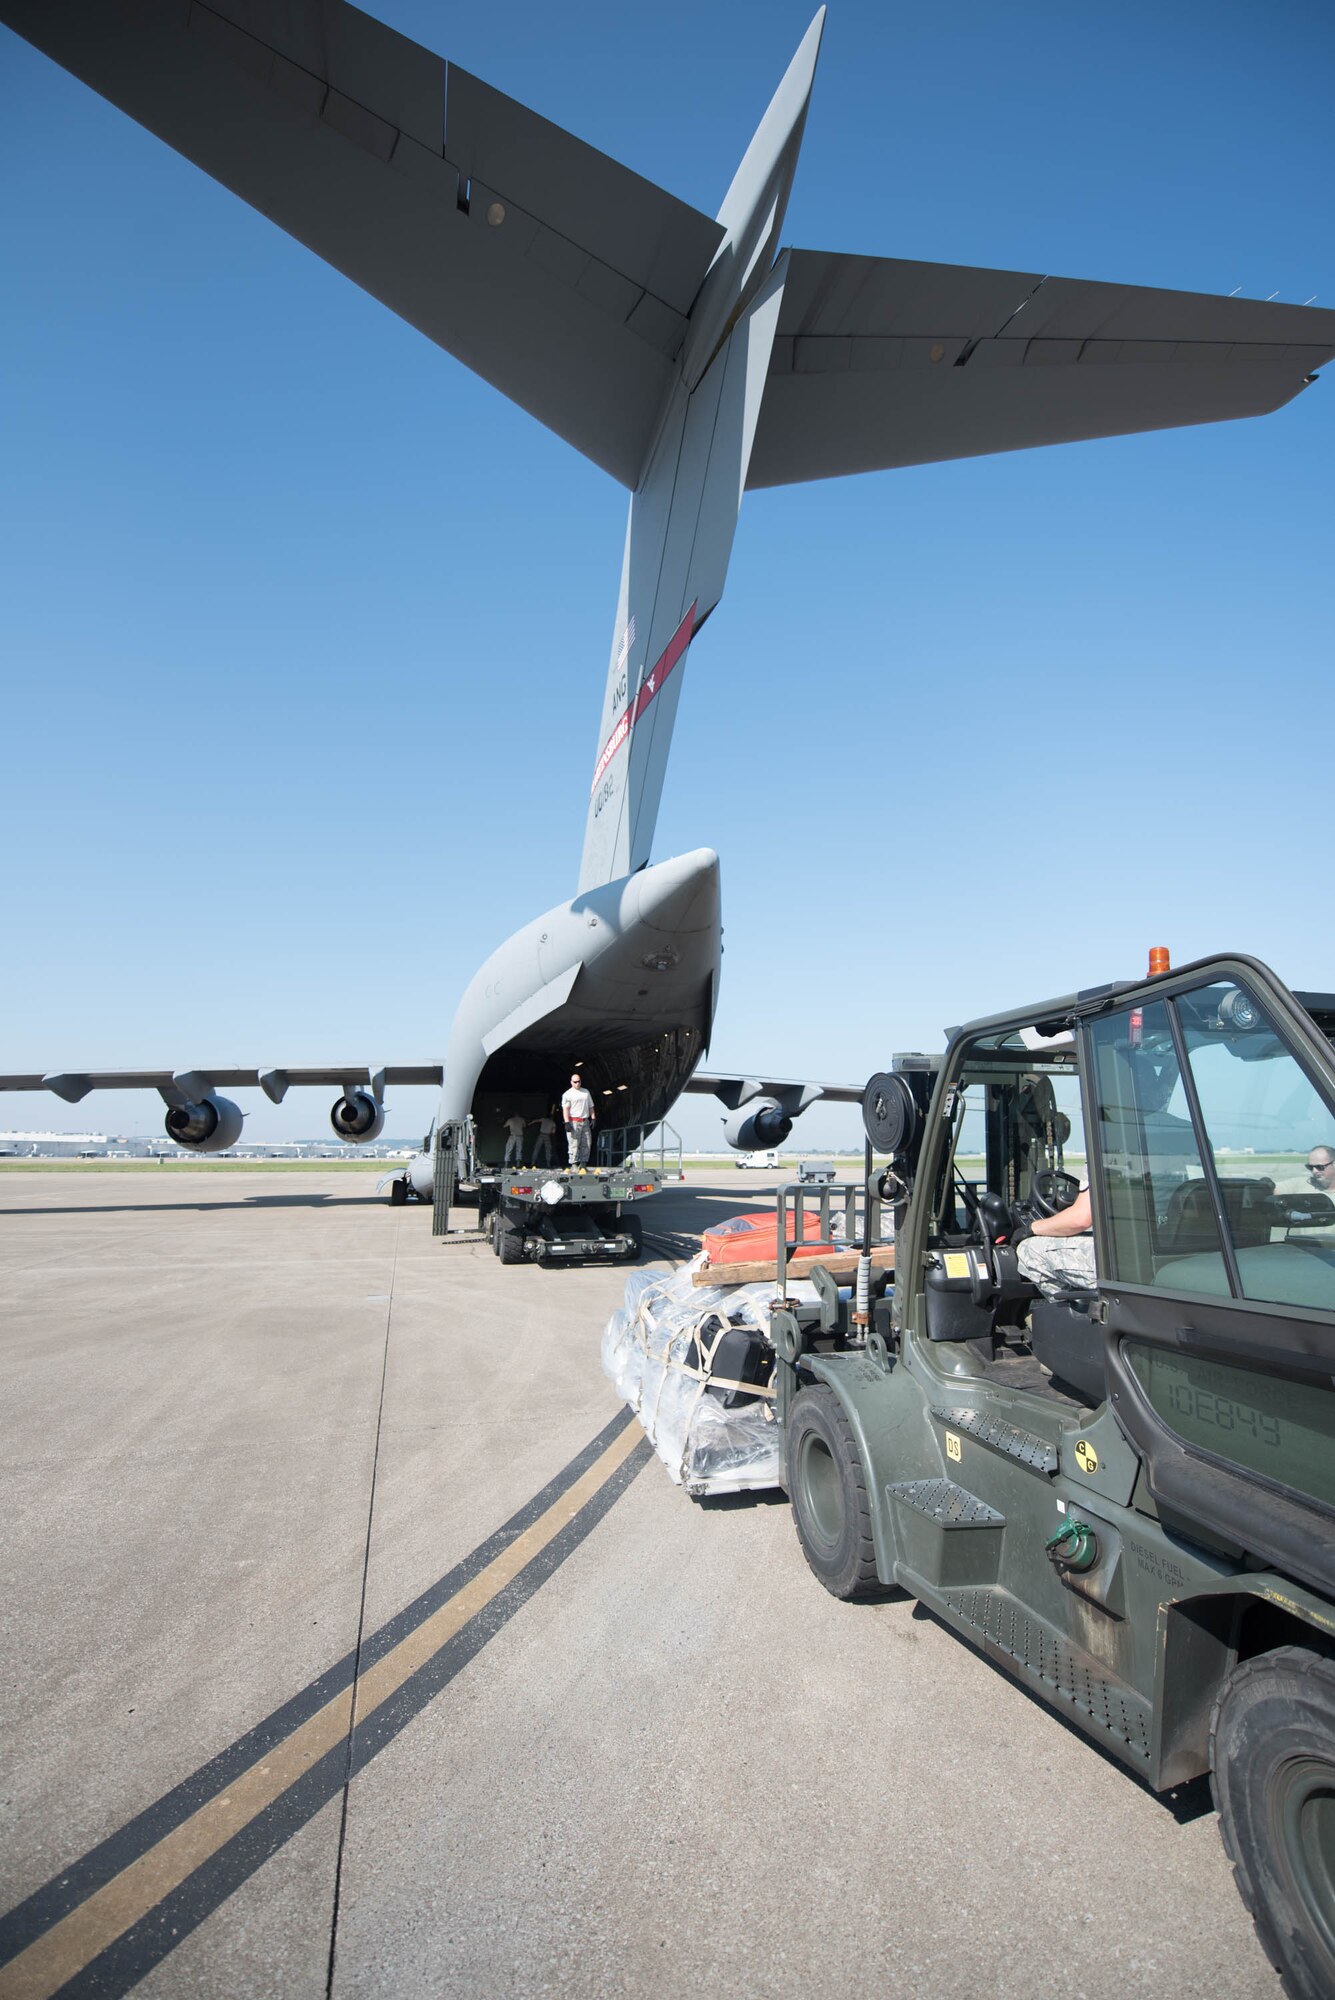 Airmen from the 123rd Airlift Wing load equipment onto a West Virginia Air National Guard C-17 at the Kentucky Air National Guard Base in Louisville, Ky., Sept 23, 2017, in support of Hurricane Maria recovery operations. Thirty-two members of the Kentucky Air National Guard’s 123rd Contingency Response Group are deploying to San Juan, Puerto Rico, along with the equipment to establish an air cargo hub to process relief supplies.